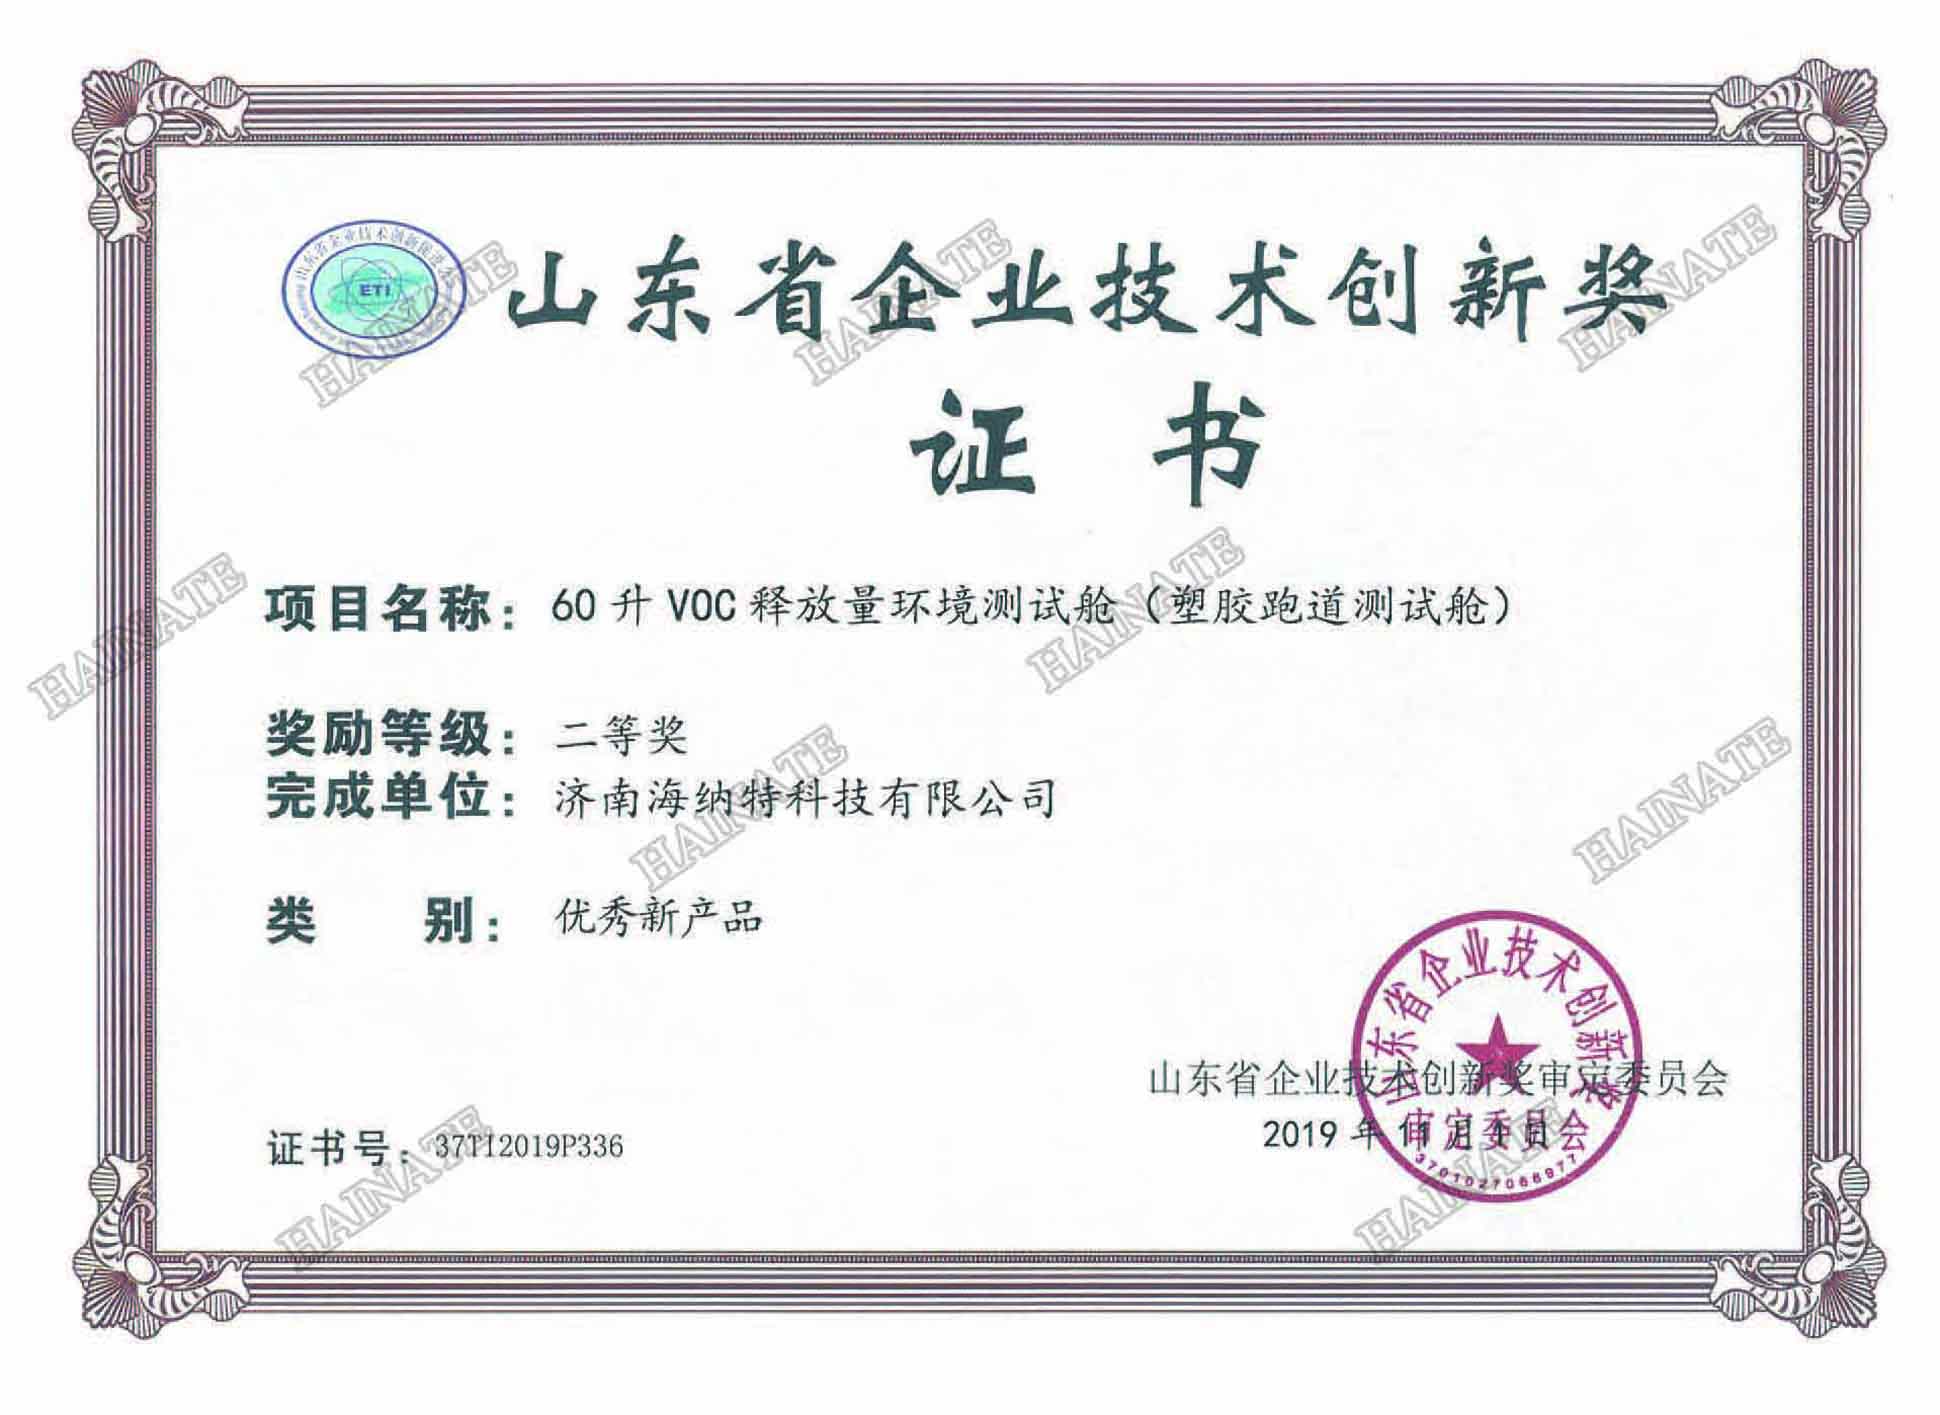 Congratulations to our company for winning the &quot;Shandong Enterprise Technology Innovation Award&quot;